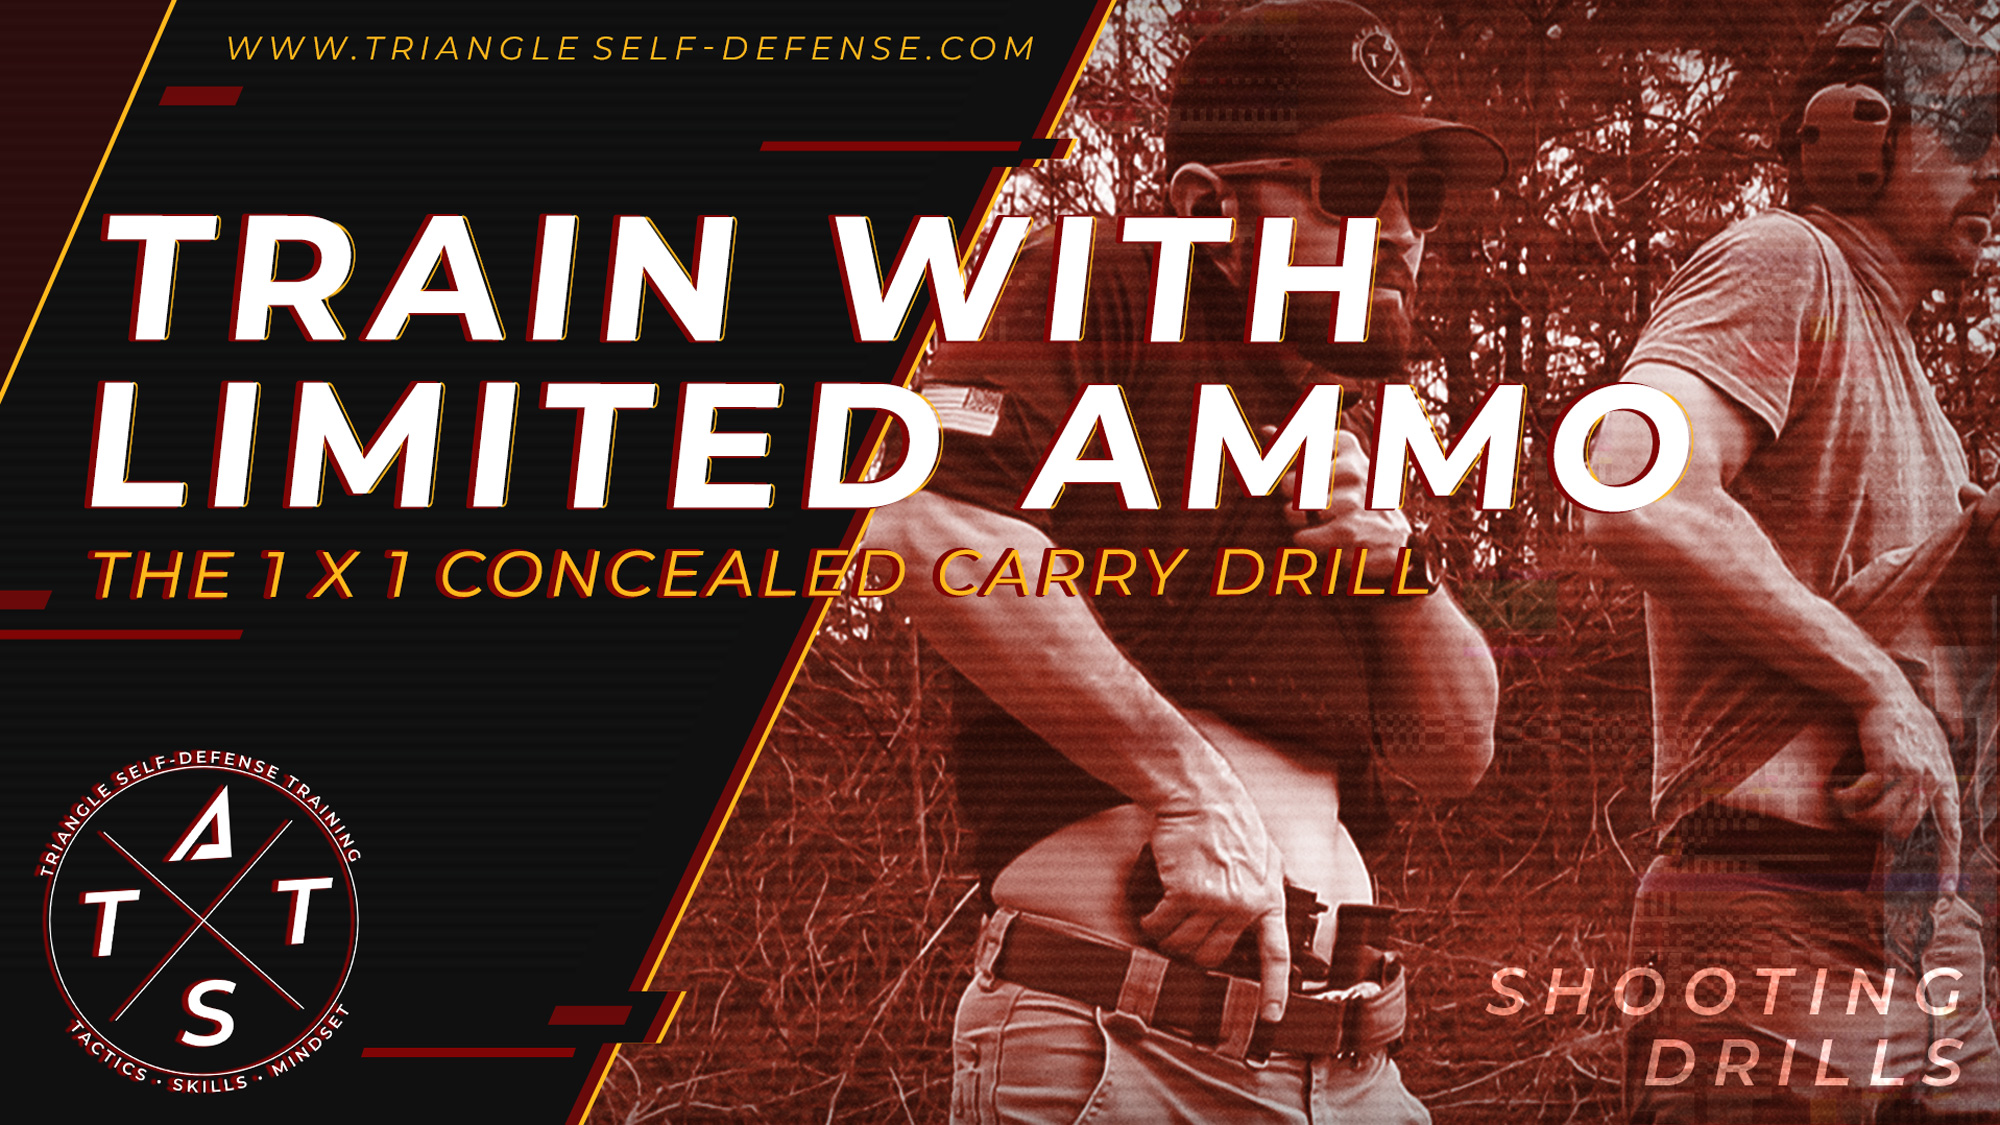 Train with limited ammo and try the 1 x 1 concealed carry drill